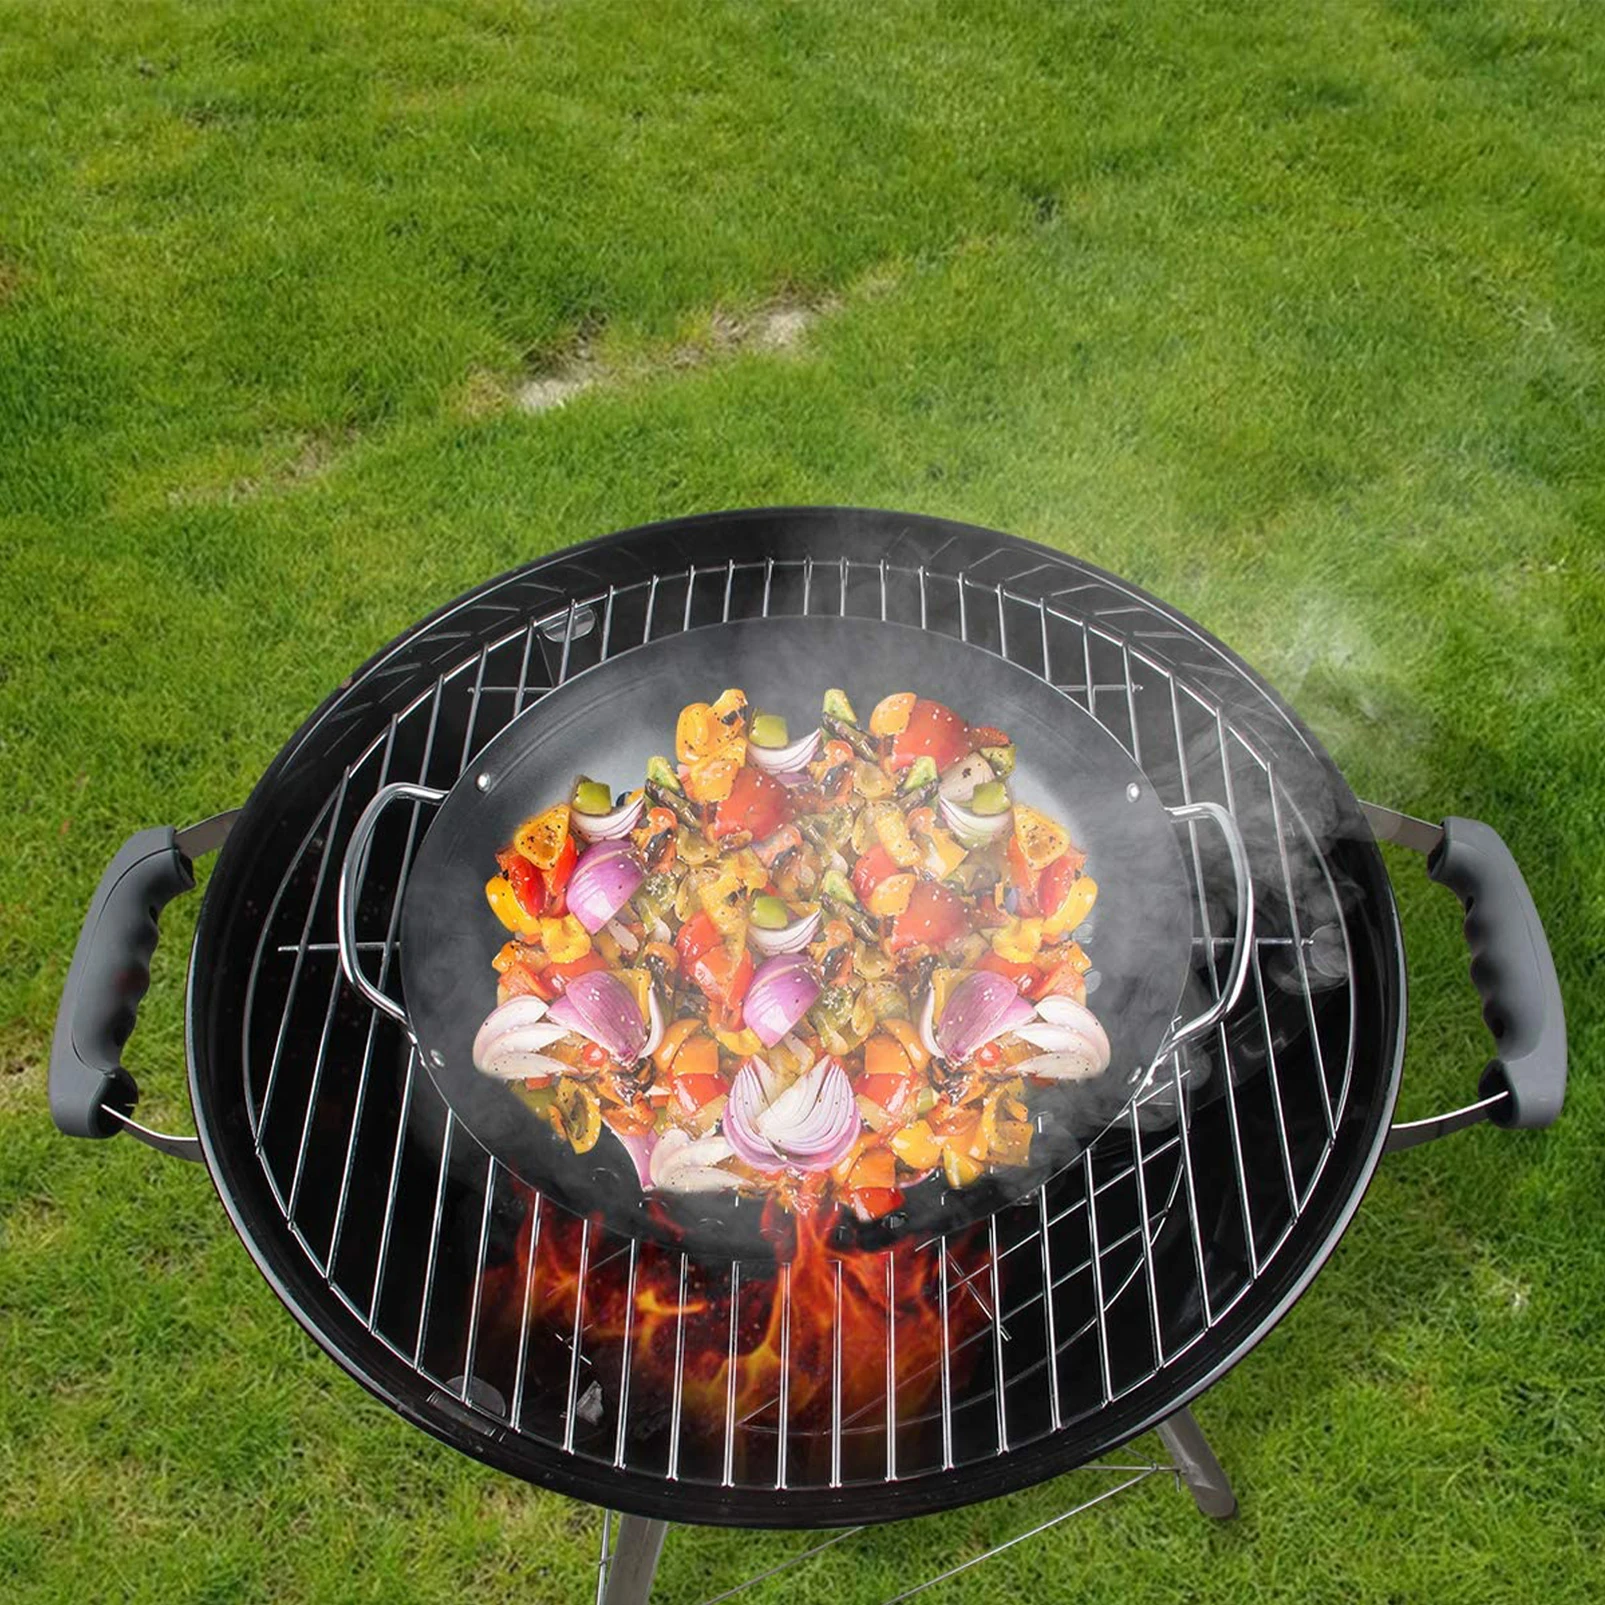 

Stainless Steel Barbecue Tray Non-Stick Charcoal Grill Plate Grills Portable Charcoal Stove for Outdoor Camping BBQ Accessories